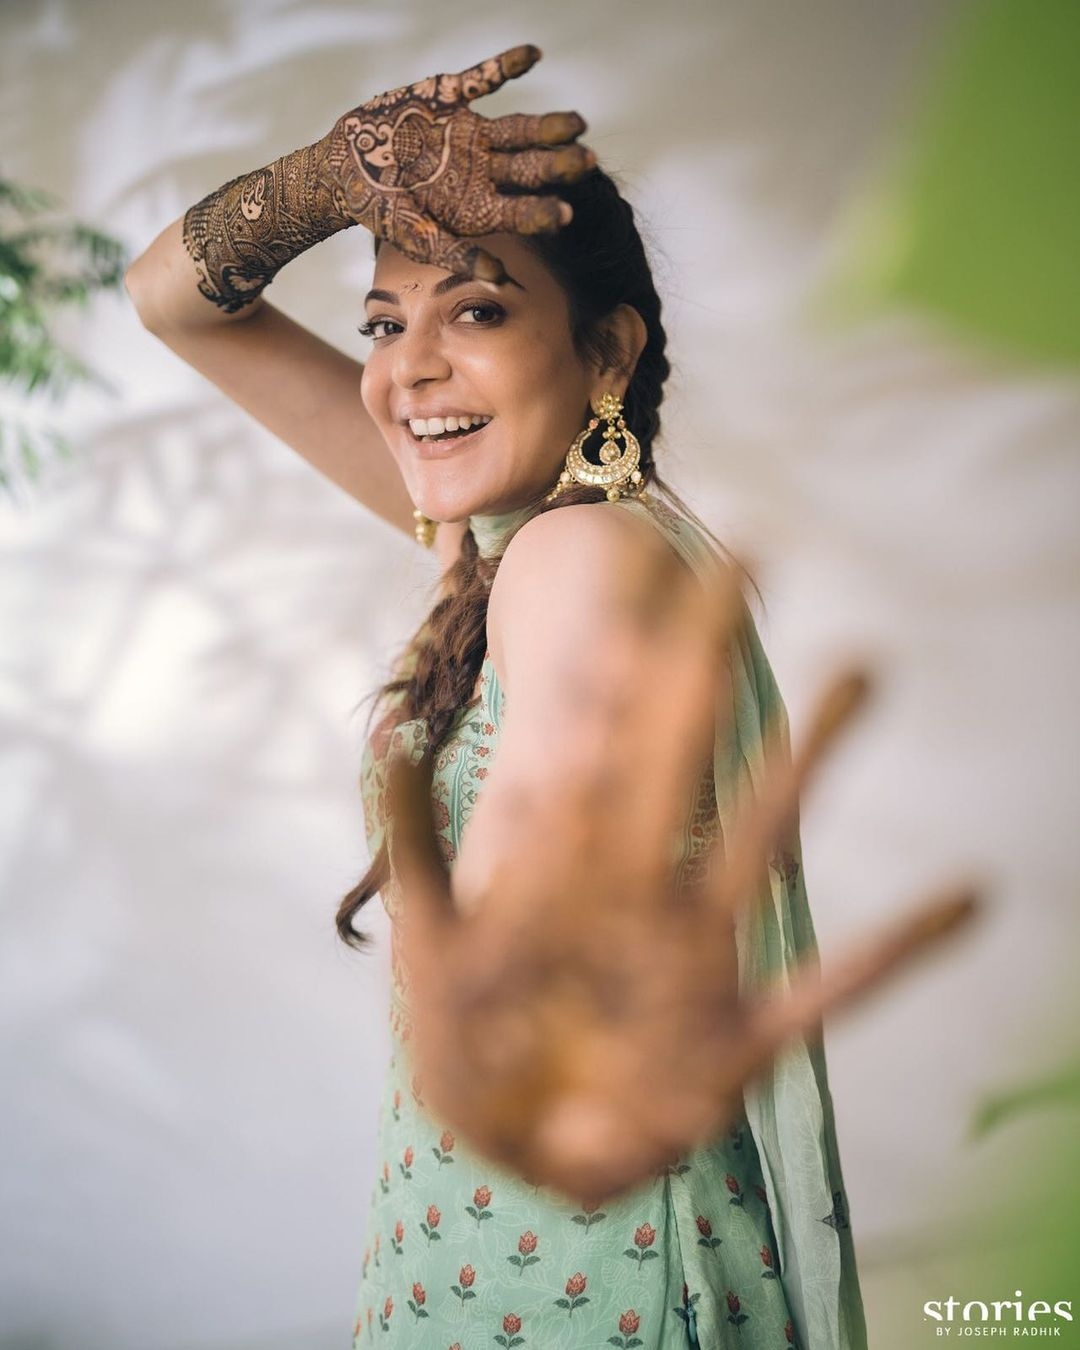 Kajal Aggarwals lovely pre-wedding ceremony photo wins hearts!